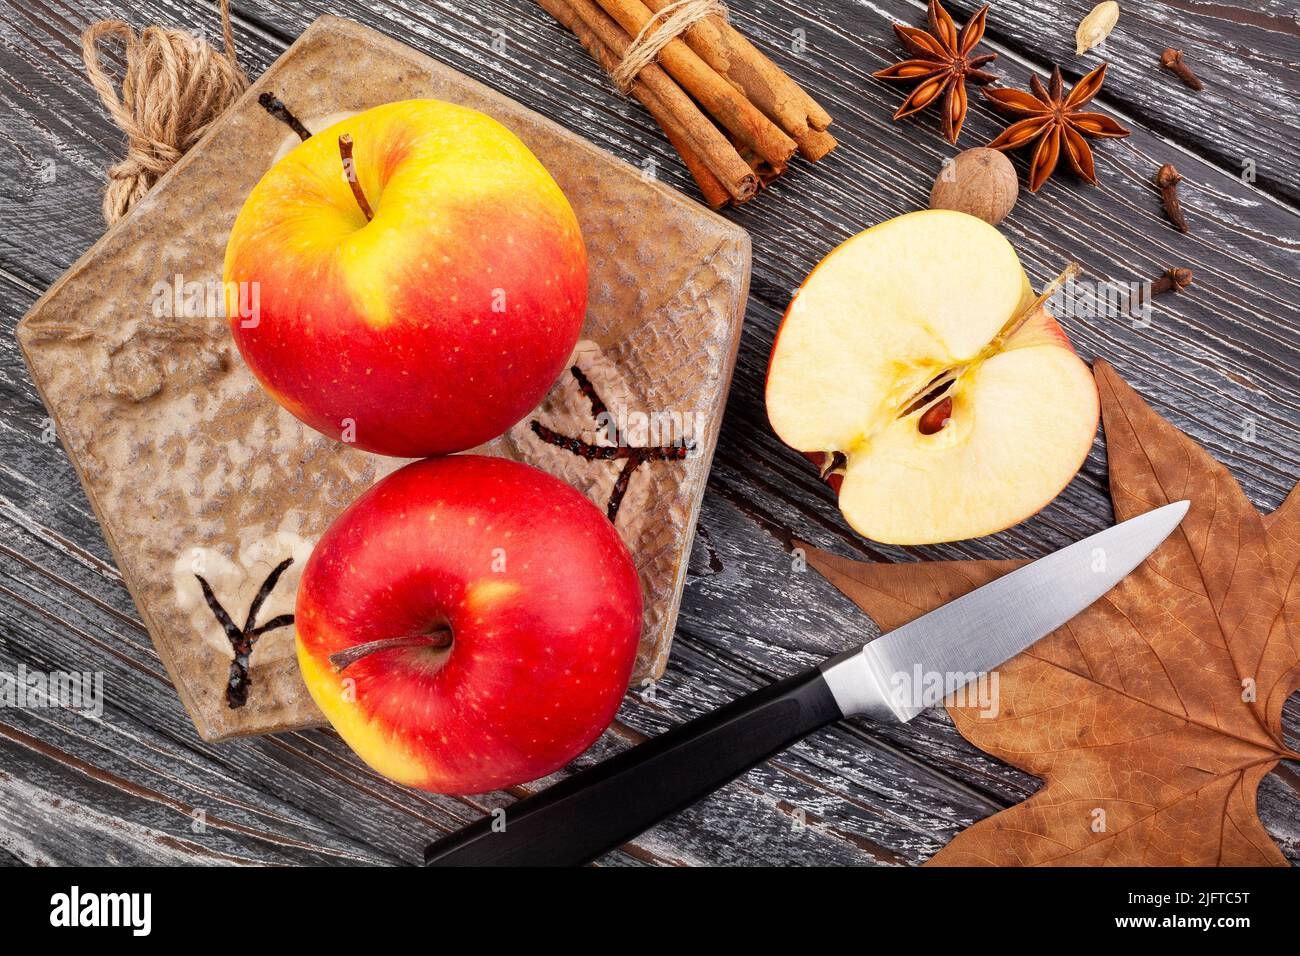 sliced colorful apples on wood background Stock Photo